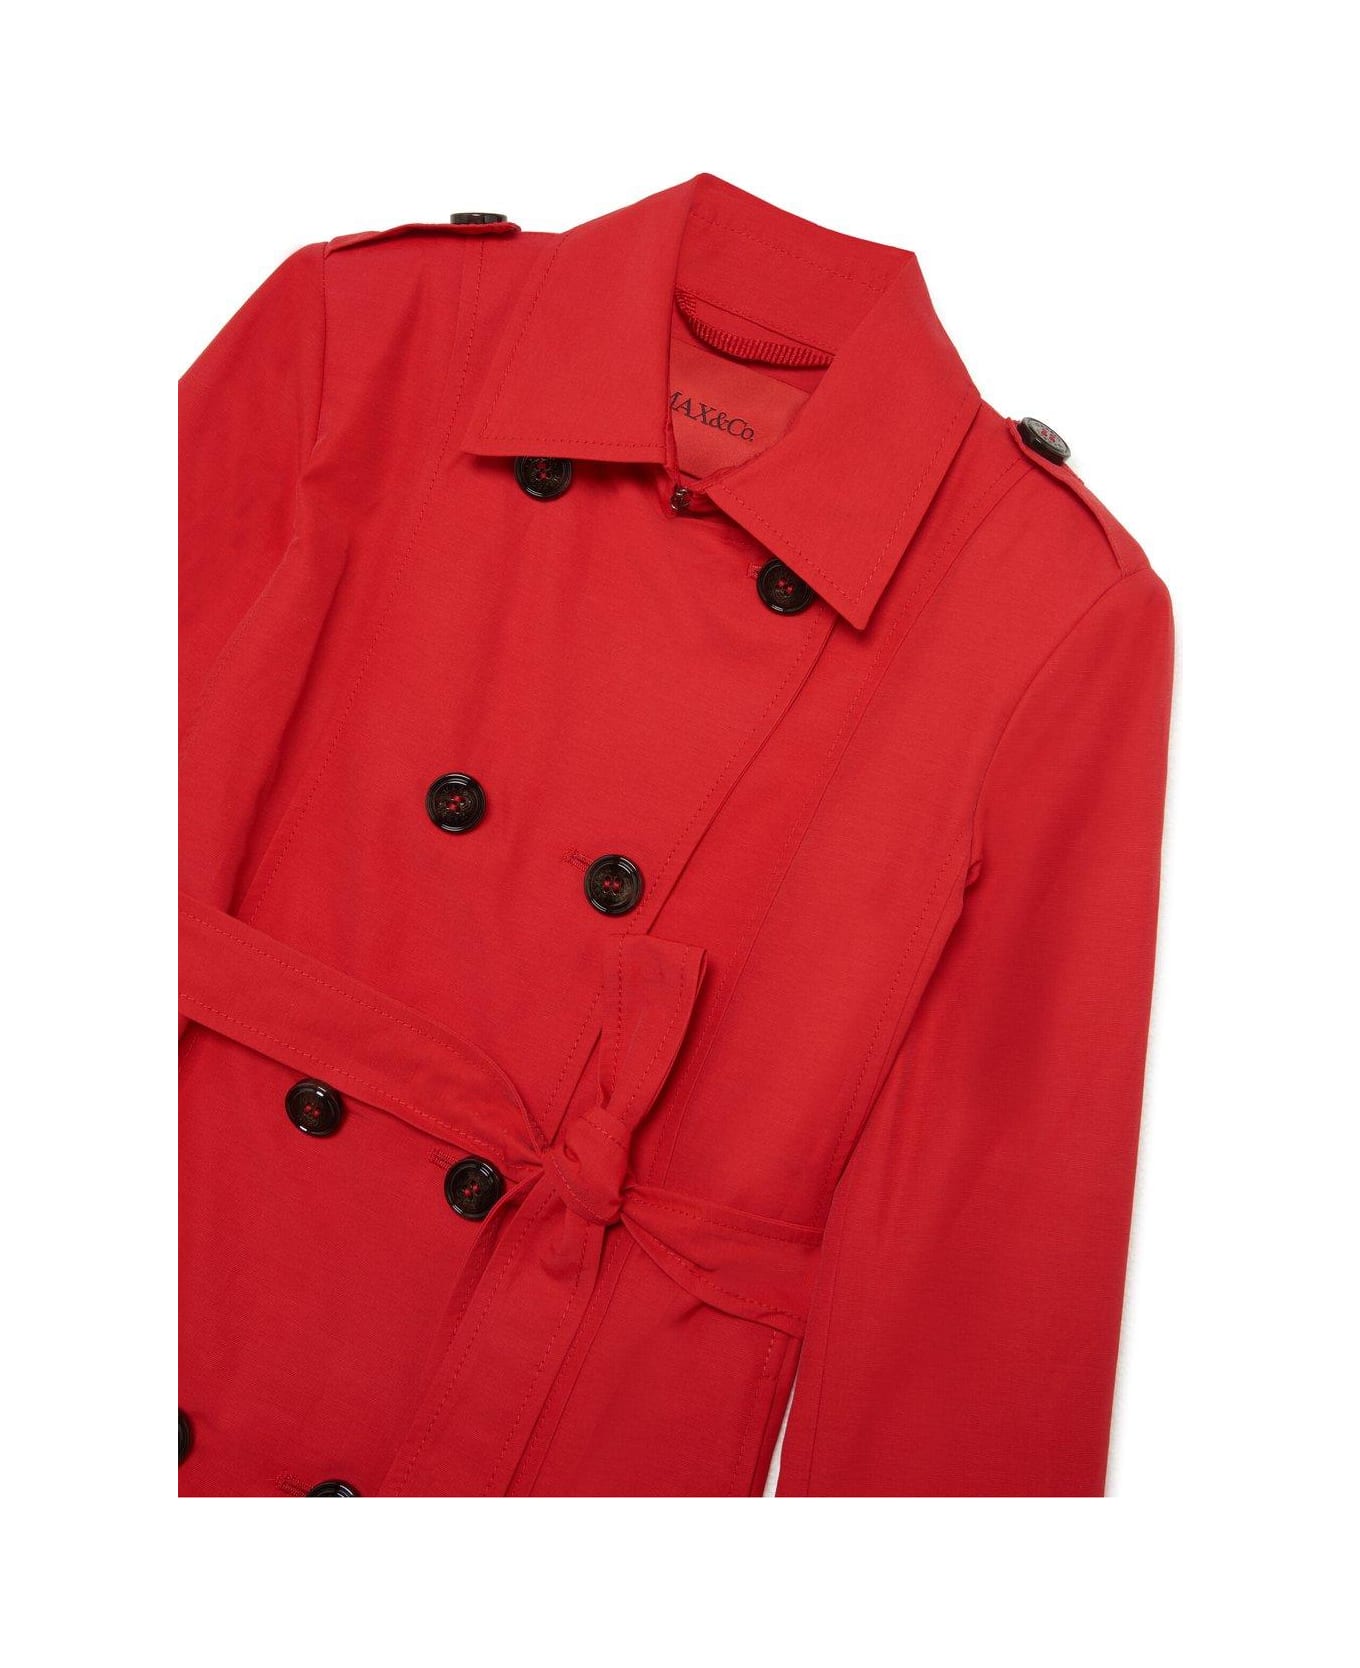 Max&Co. Belted Double-breasted Long Sleeved Coat - Rosso